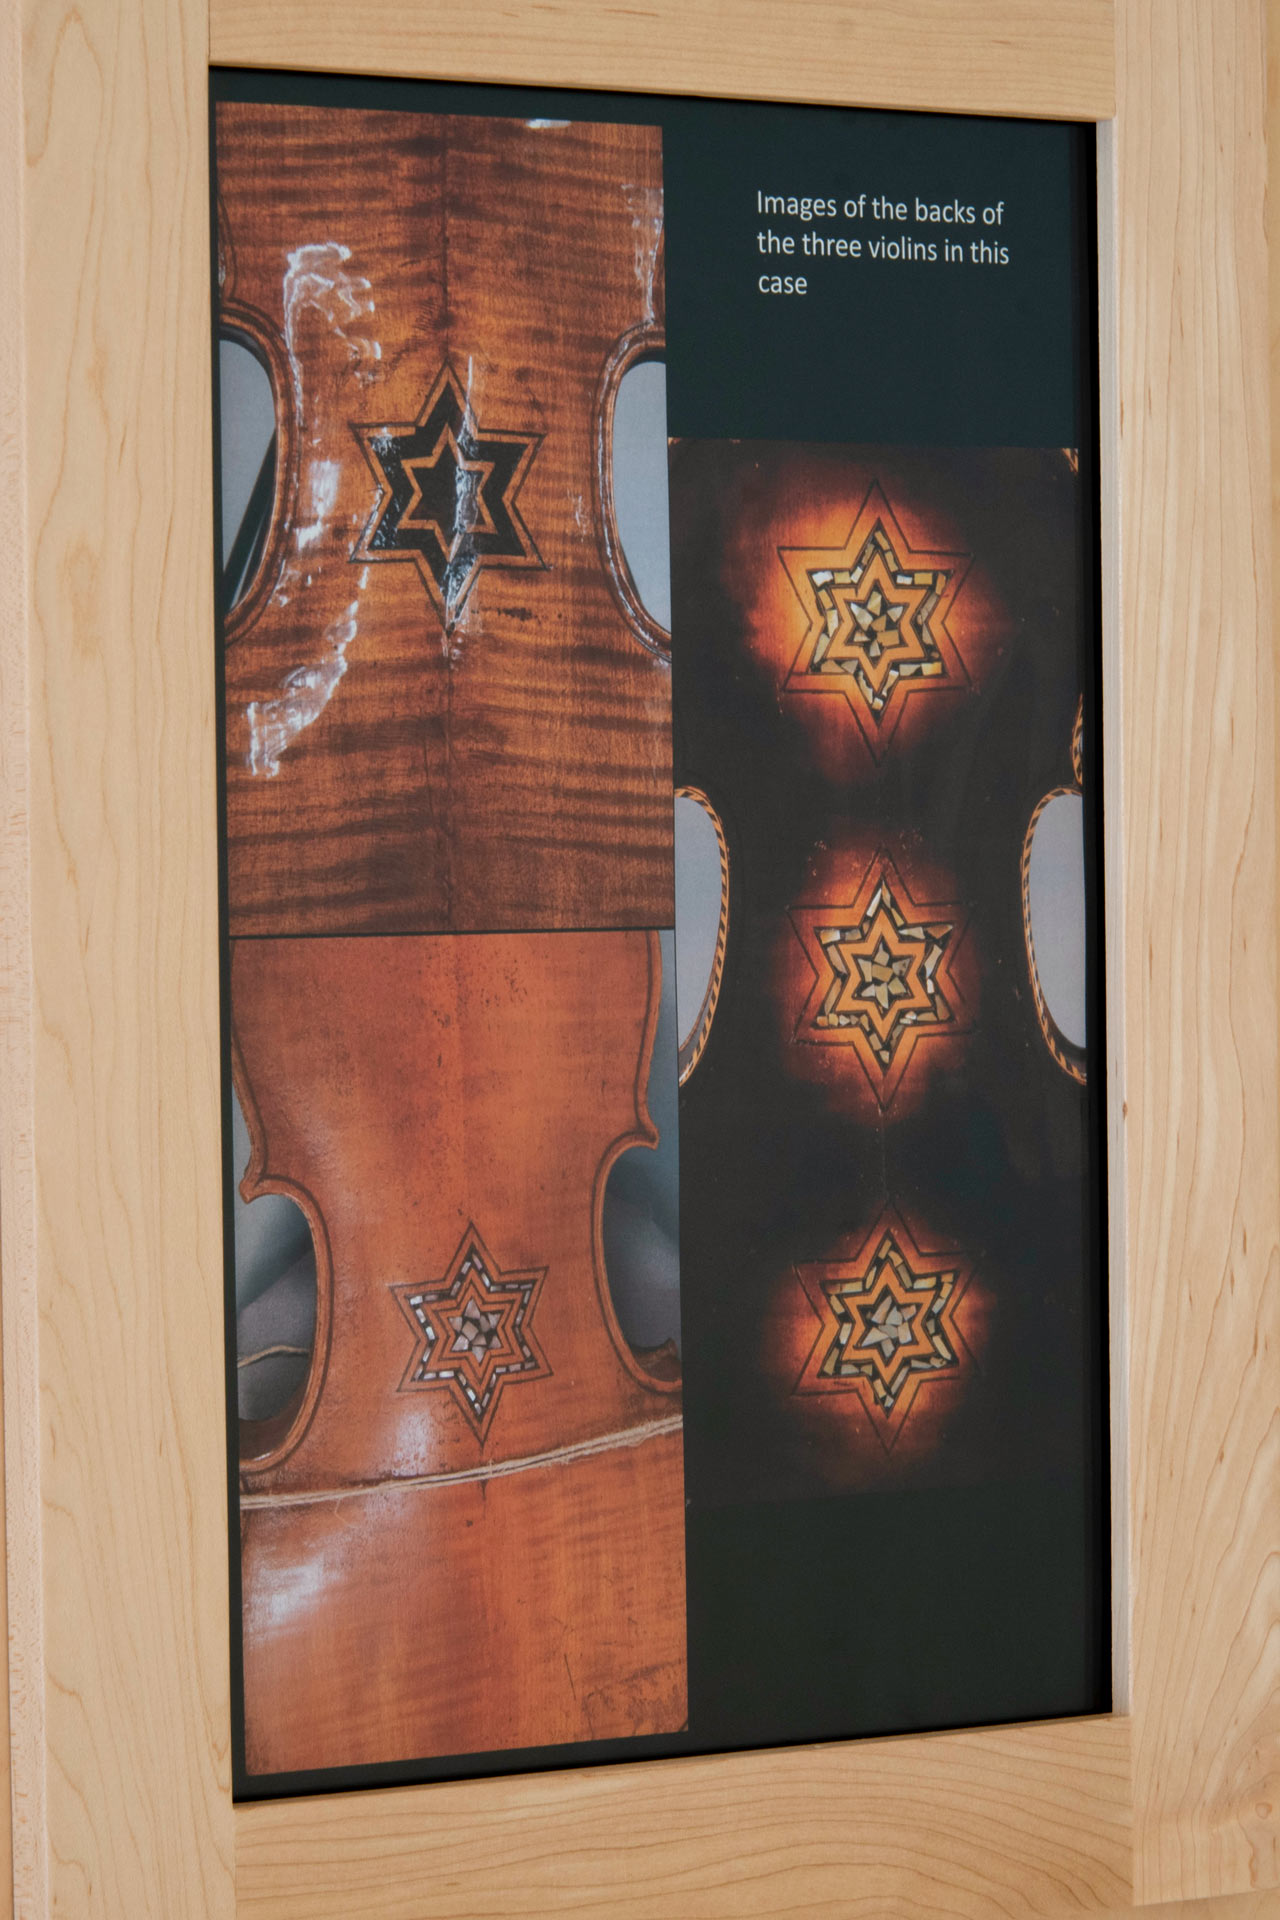 exhibit label with pictures of the backs of the violins on display